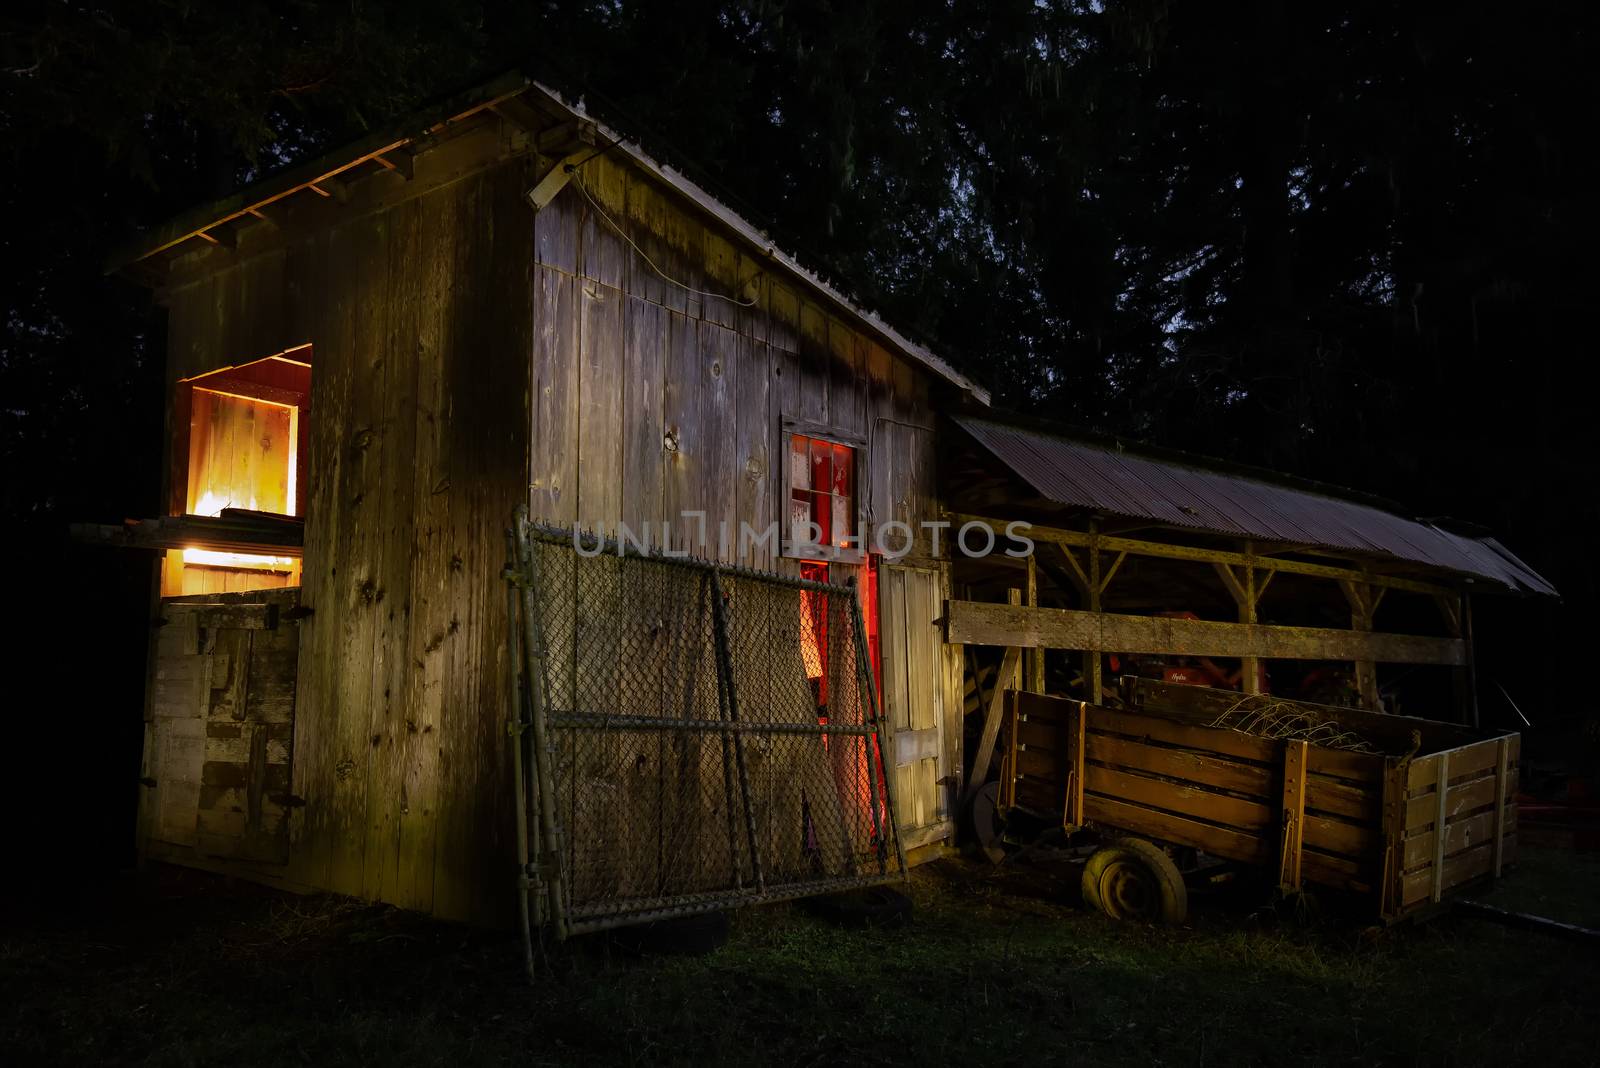 Night at an Small Farm in California by backyard_photography